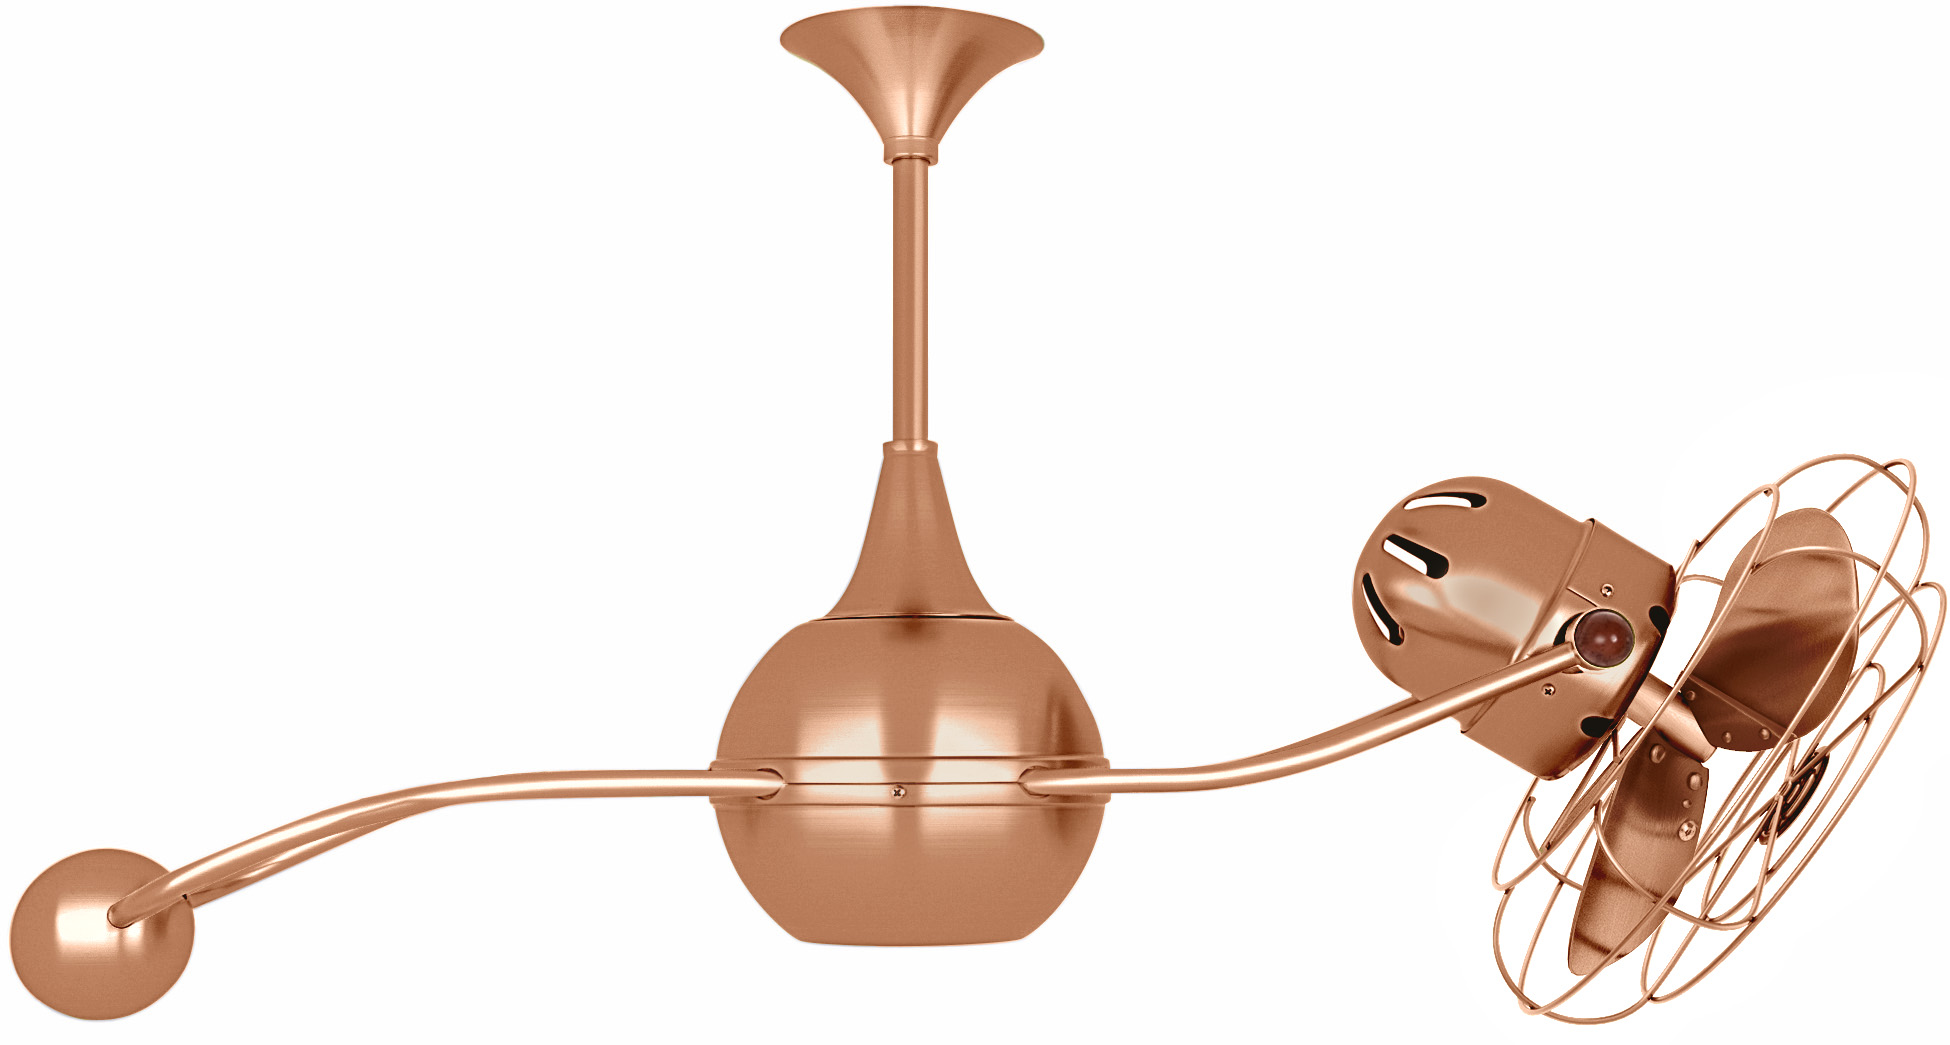 Brisa 2000 ceiling fan in brushed copper with metal blades in decorative cage made by Matthews Fan Company.